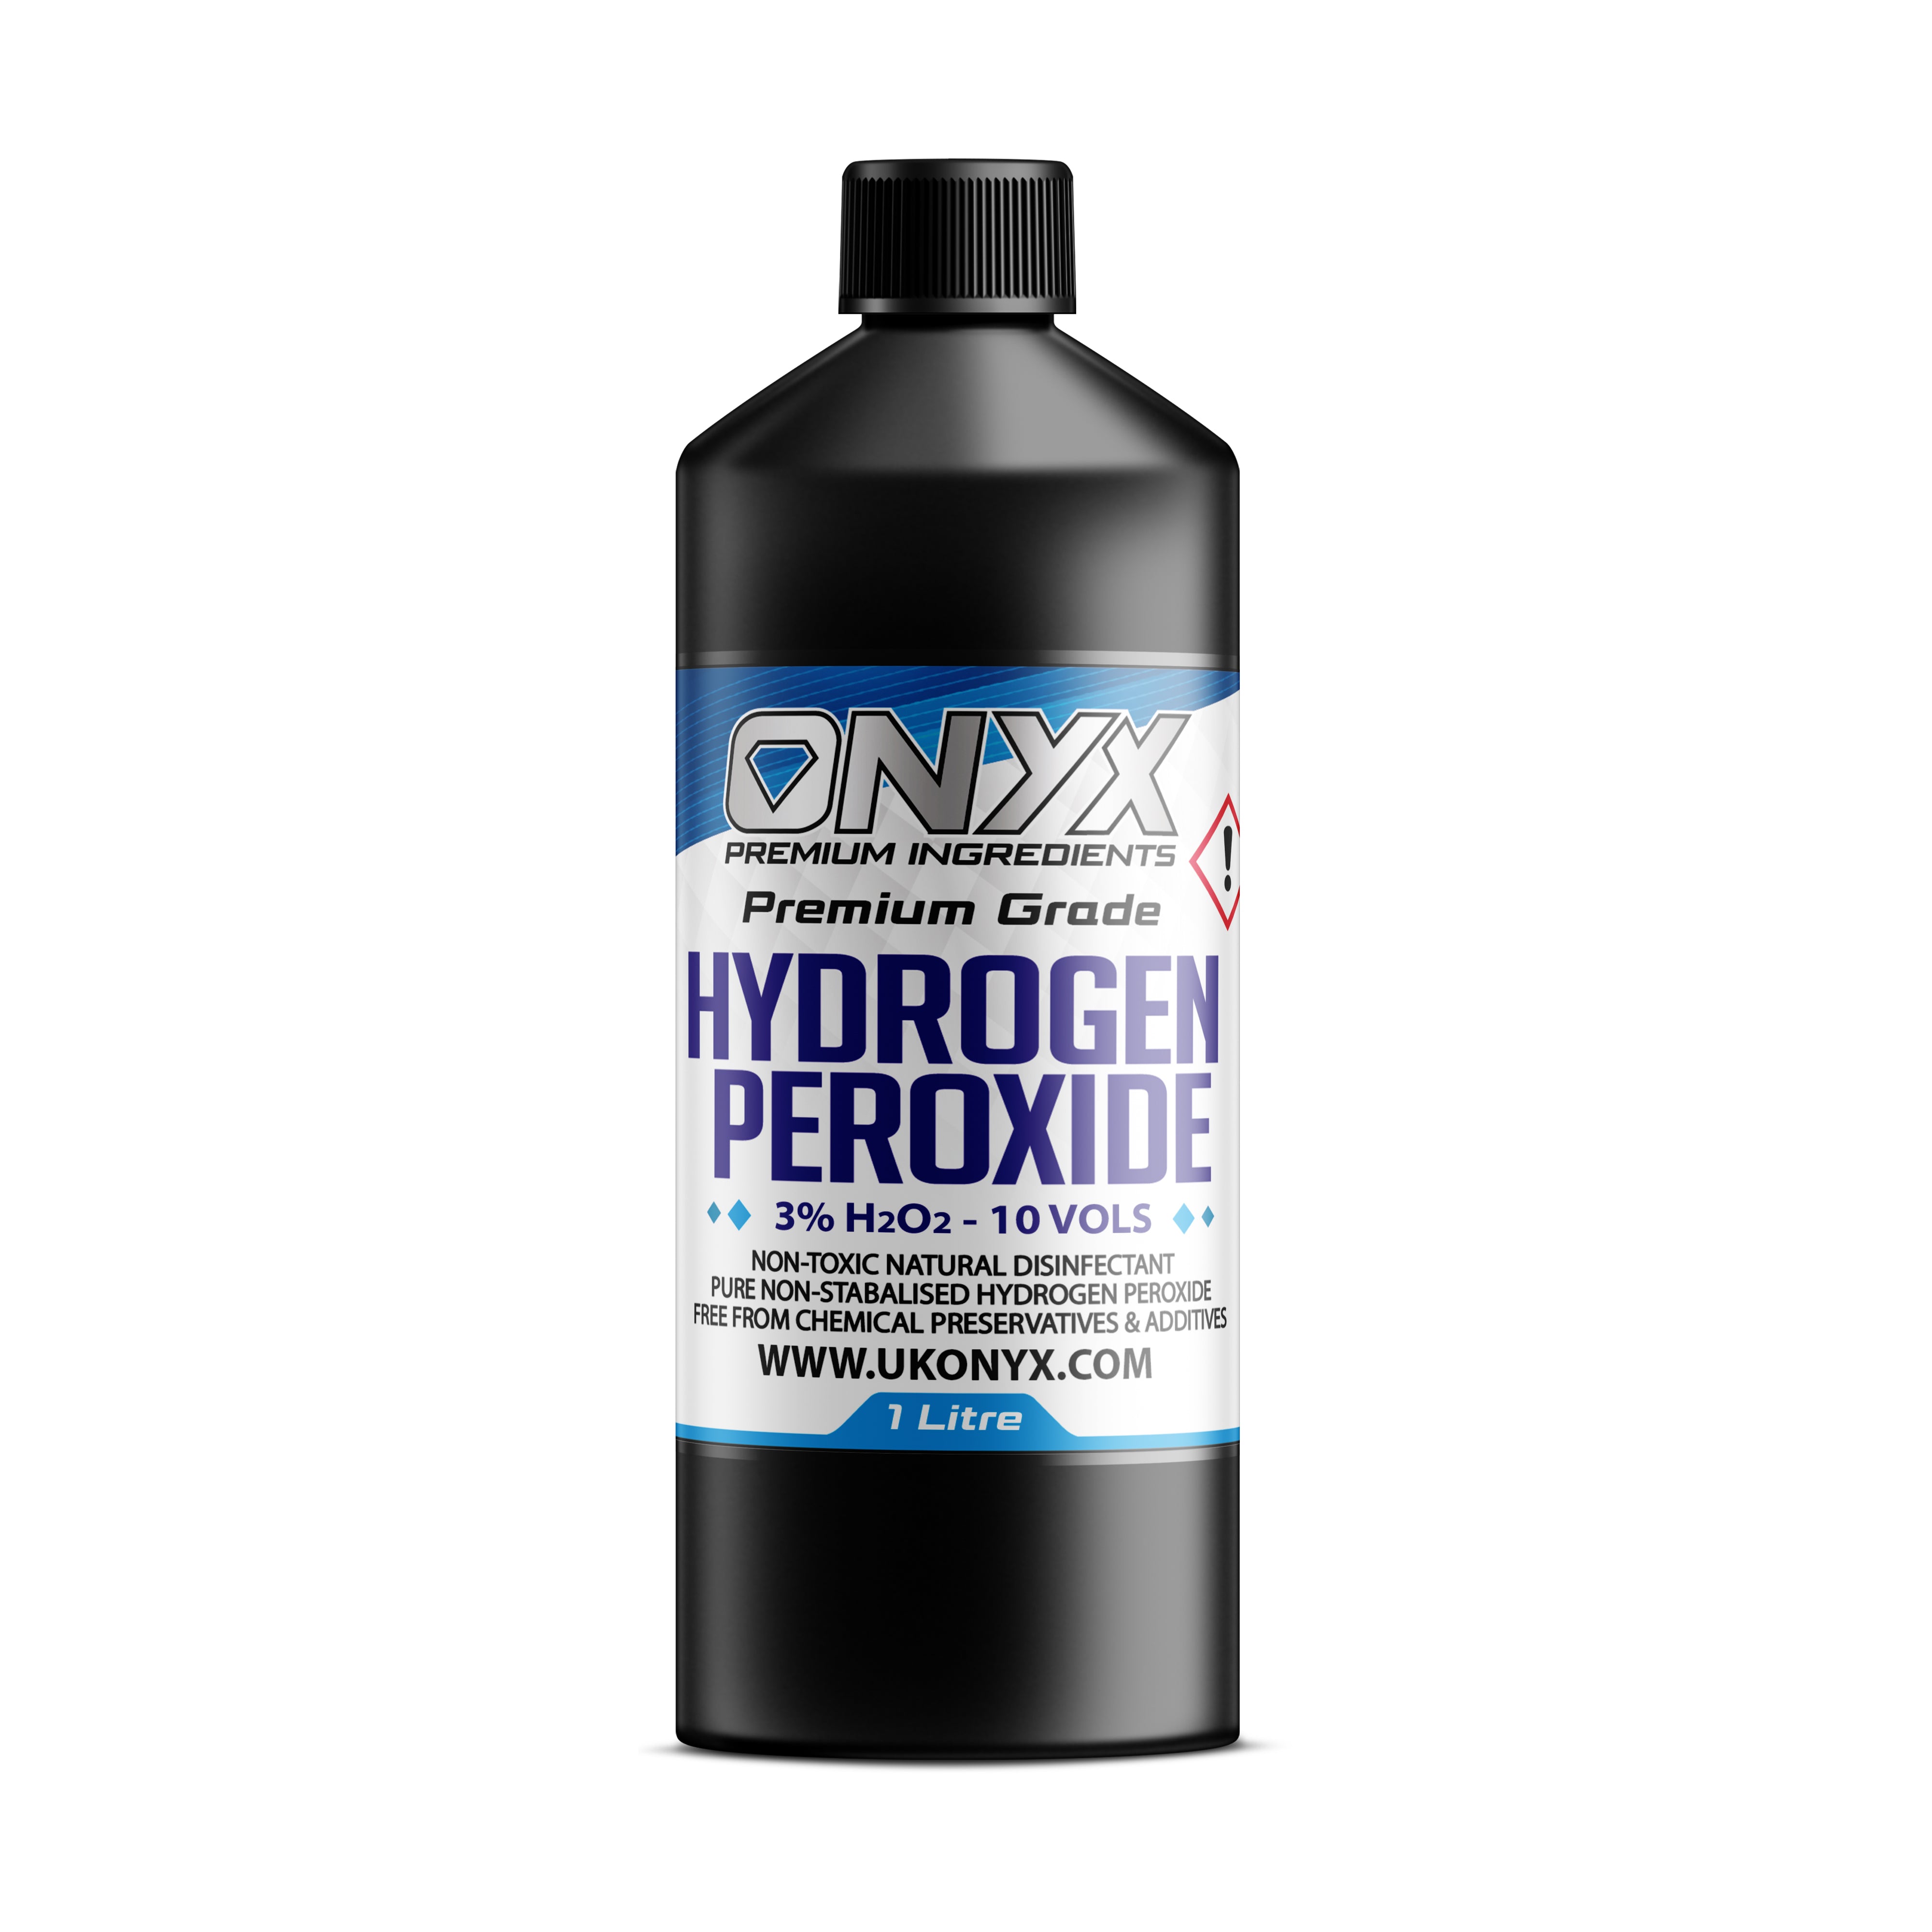 Hydrogen Peroxide Pure Food Grade 3%, 10 Vols. Non-Toxic Natural Disinfectant Cleaner